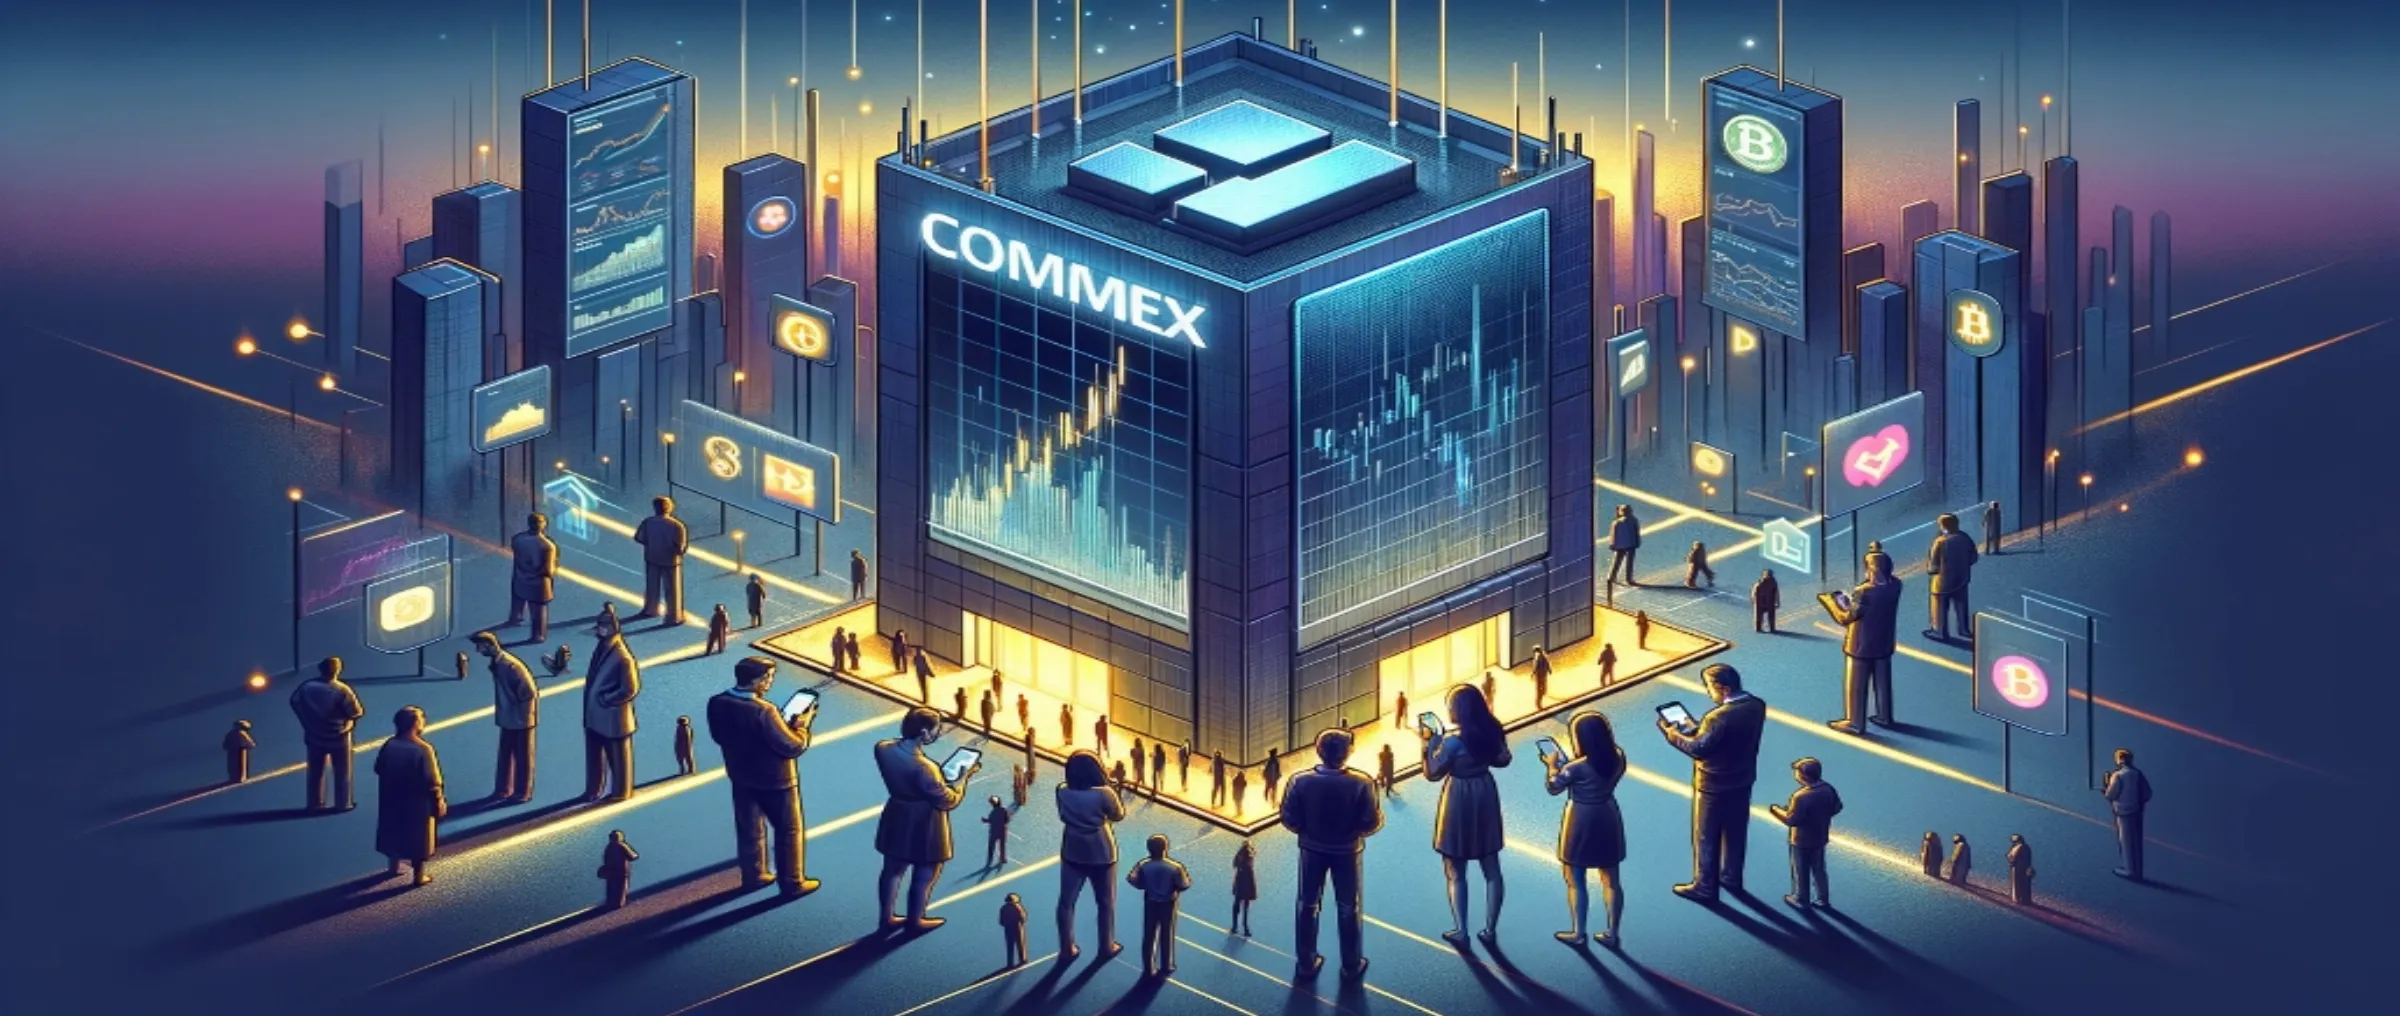 CommEX is closing: what should former Binance customers do?